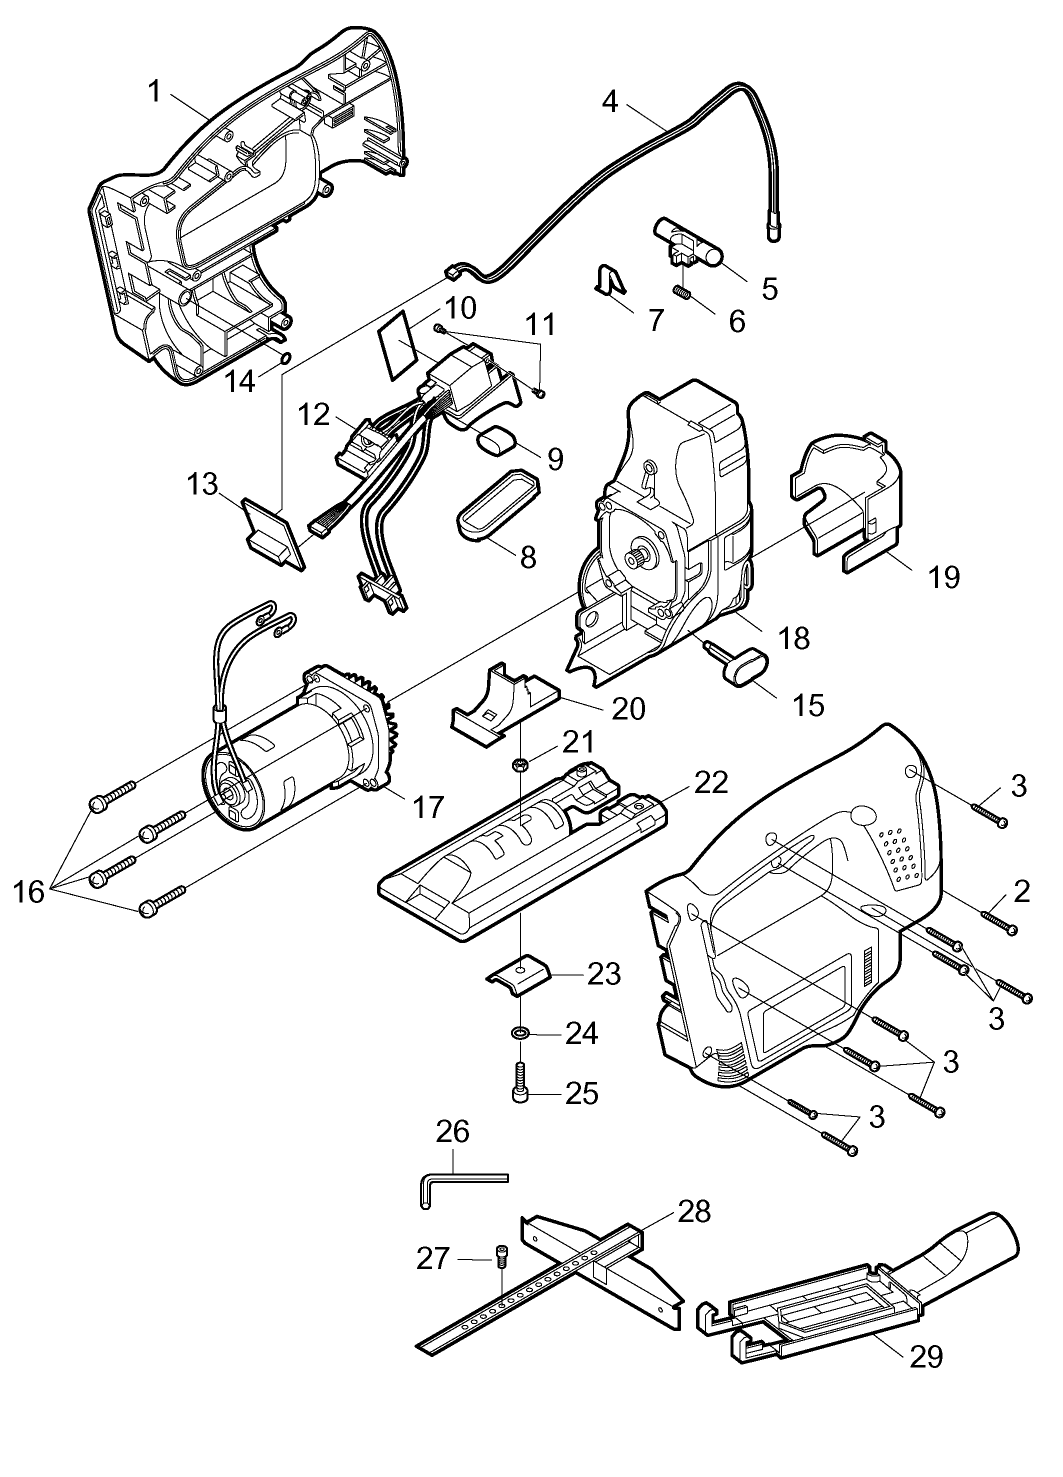 EY4550: Exploded View